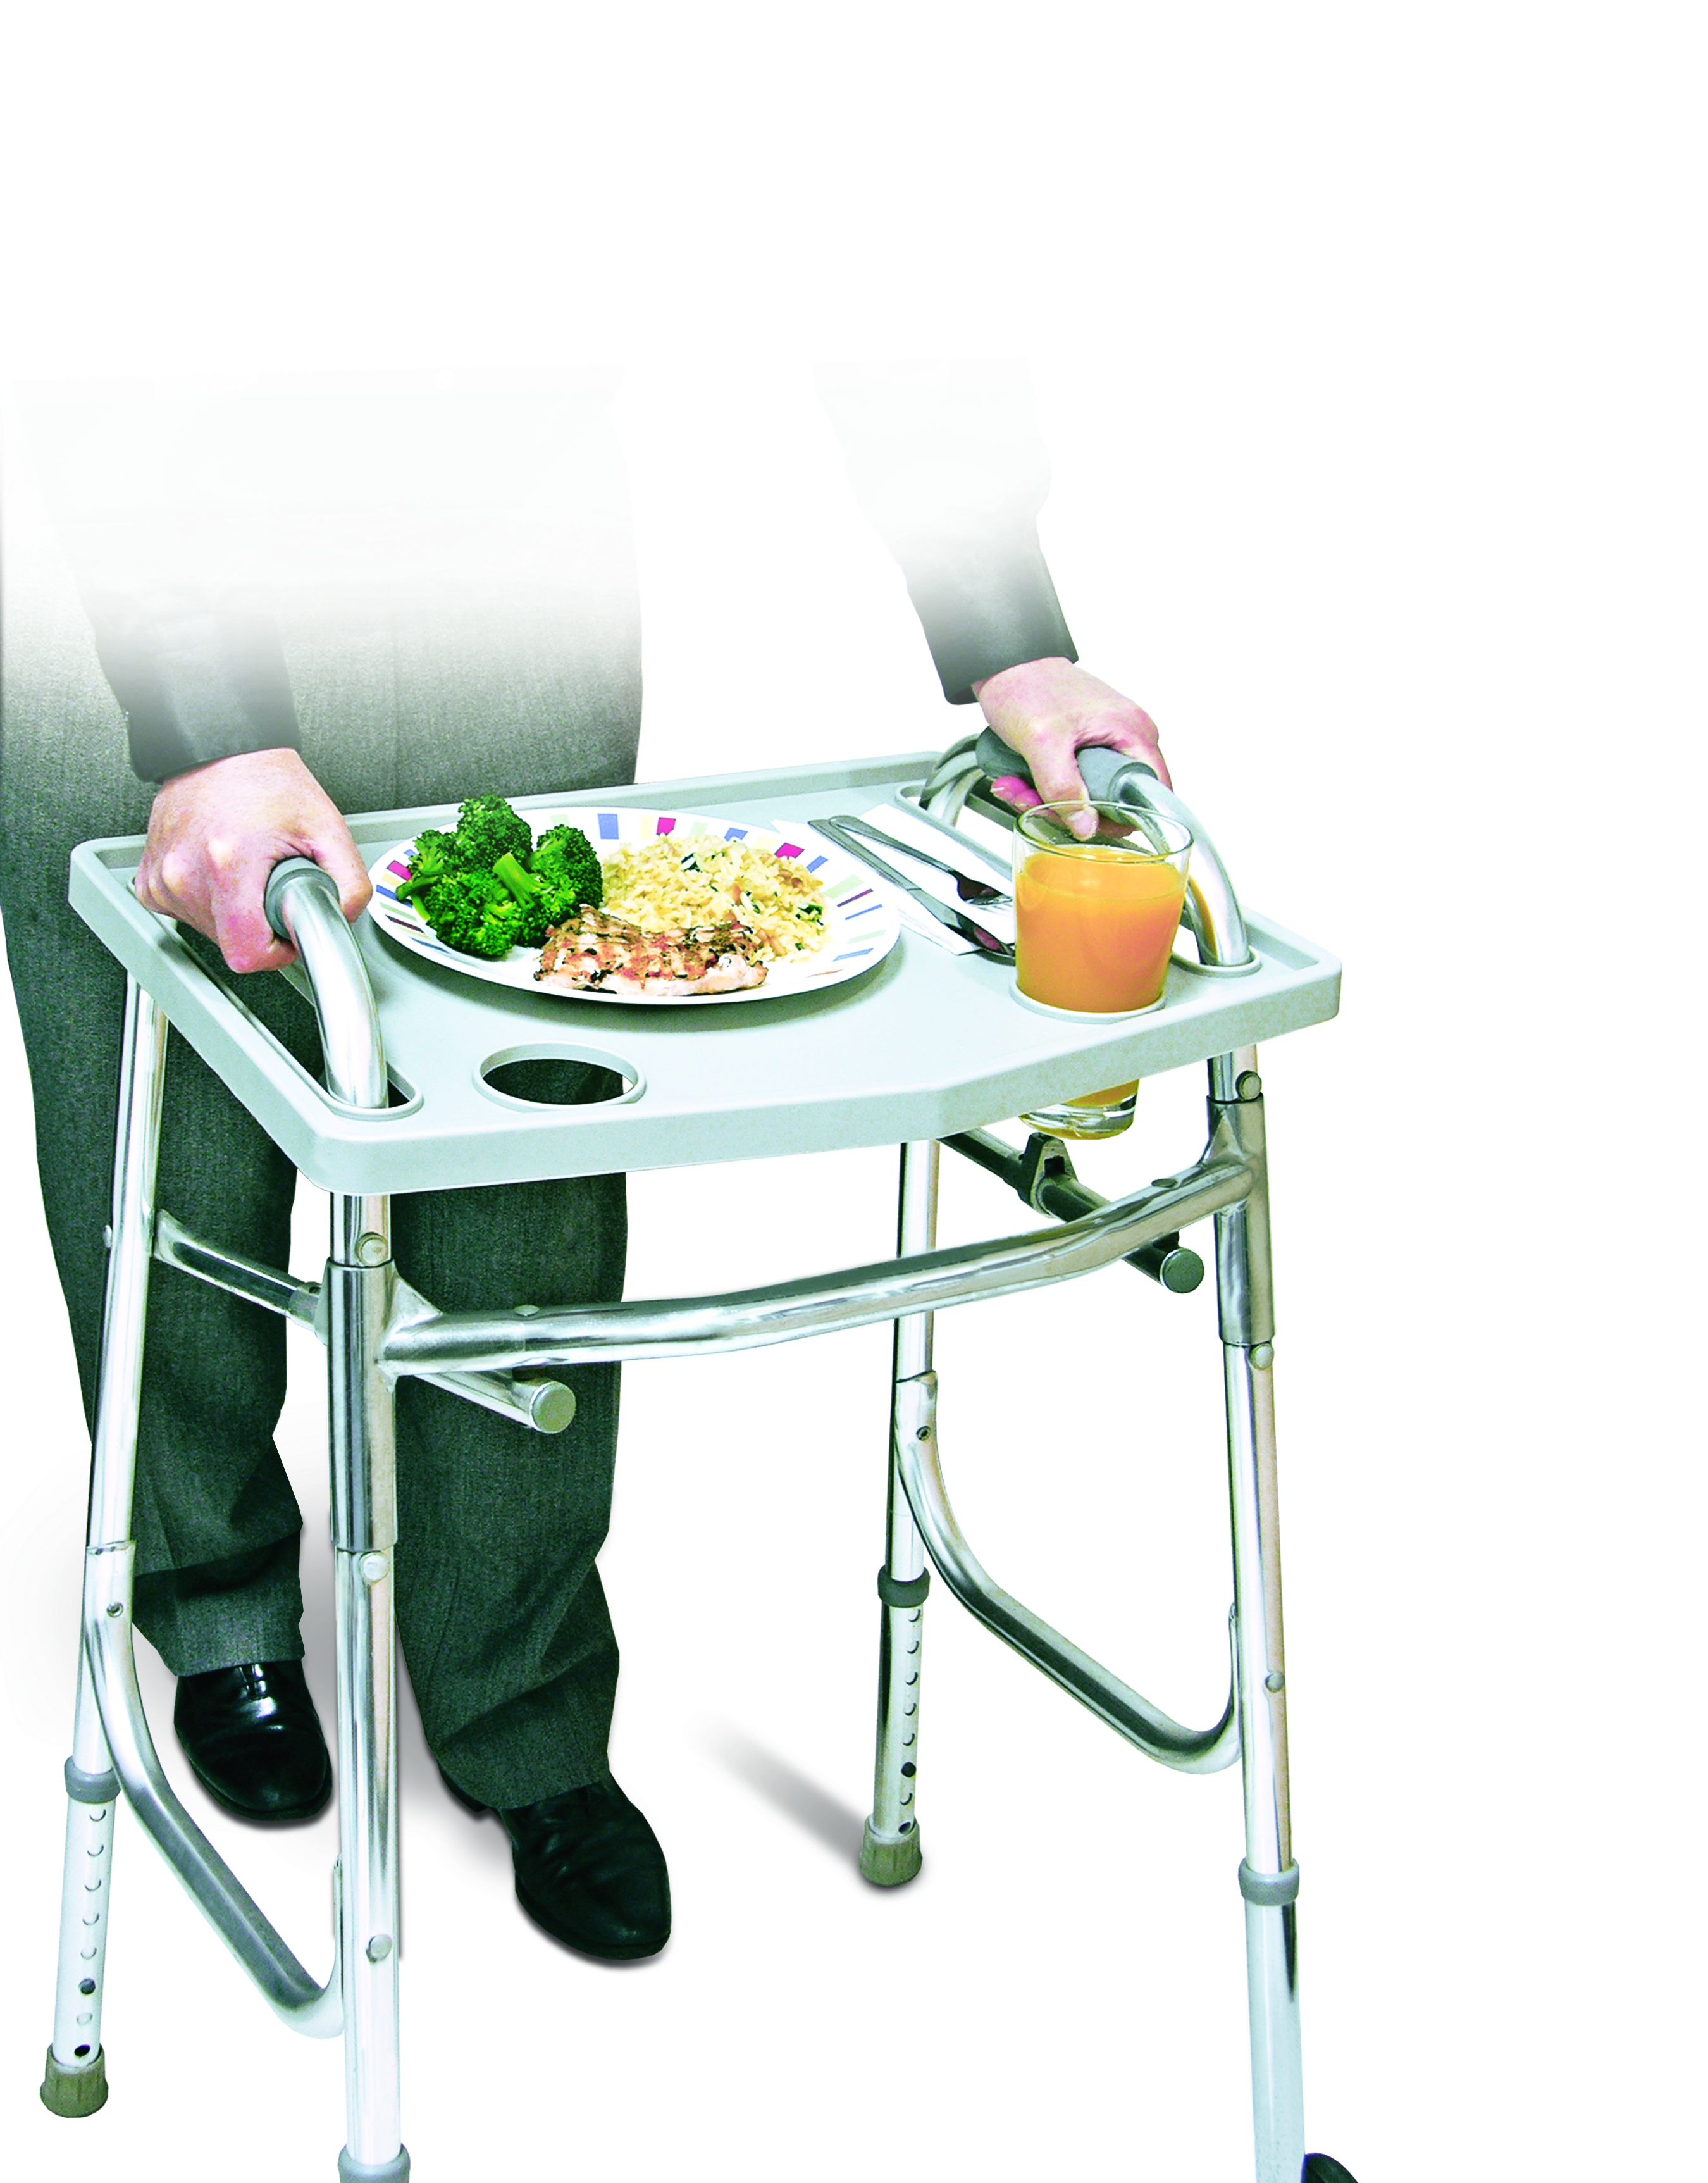 WALKER TRAY - GRAY product image